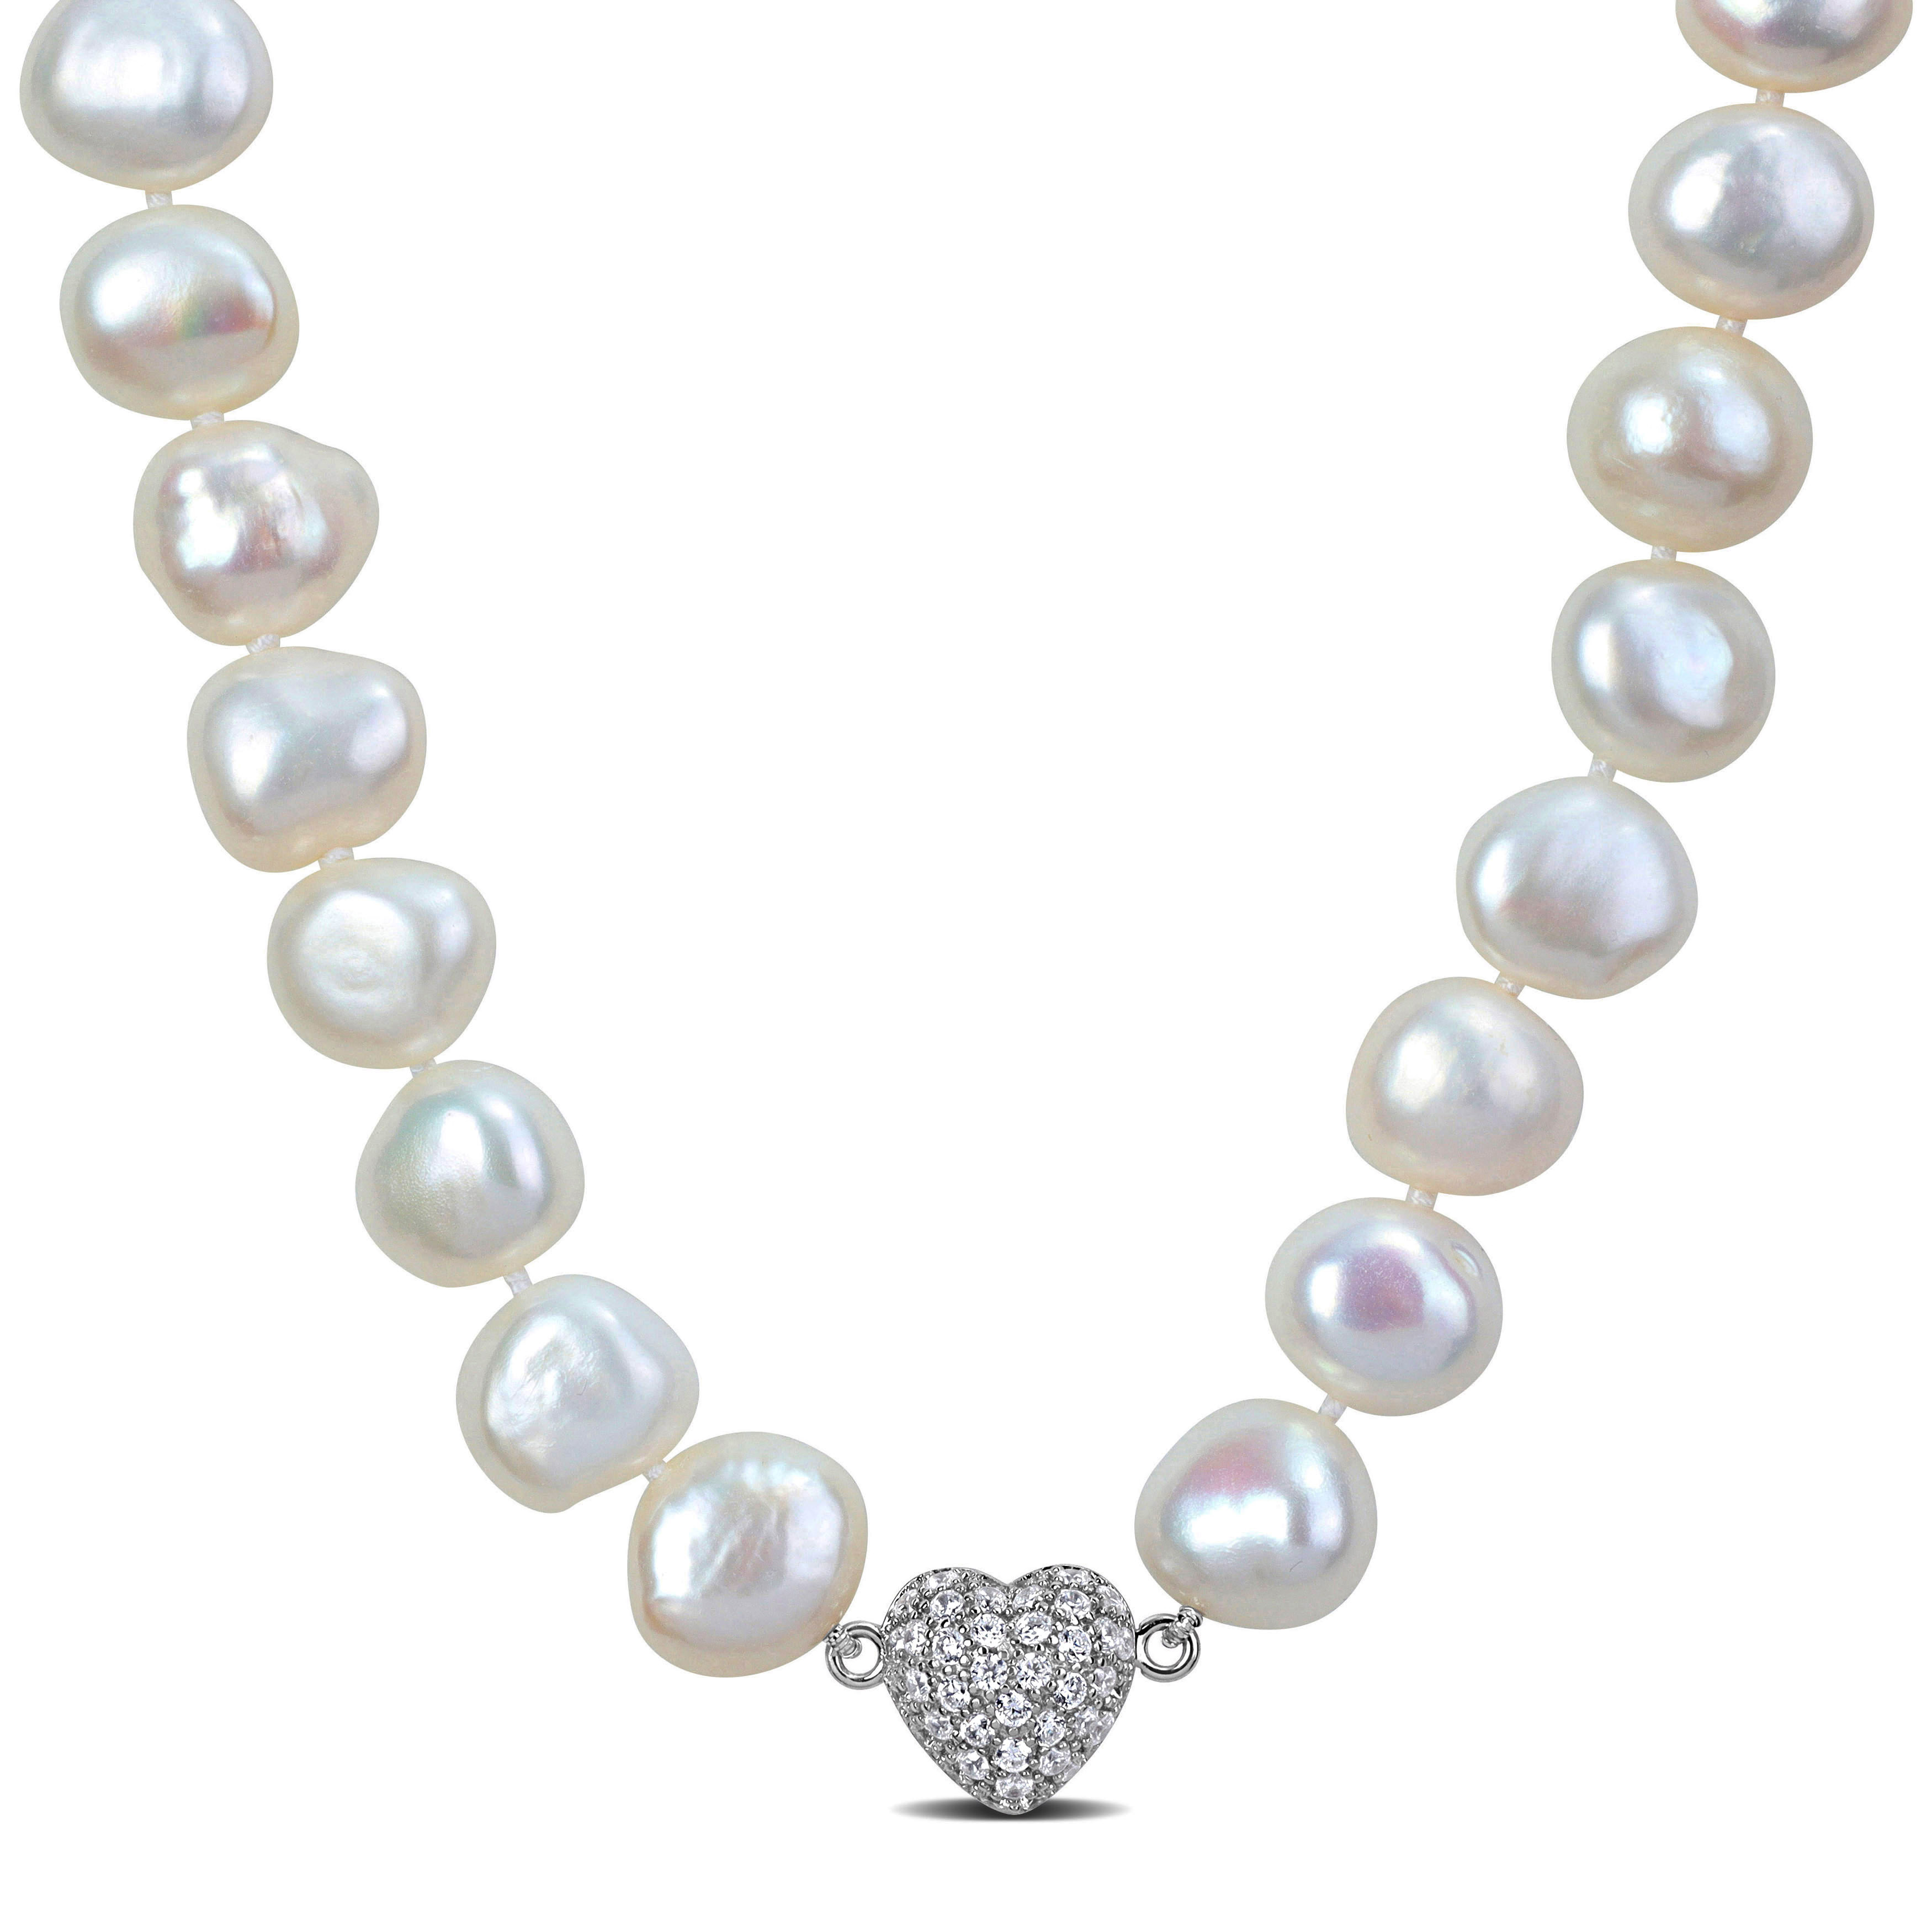 11-12 MM Cultured Freshwater Pearl Strand & Heart-Shape Cubic Zirconia Necklace - 20 in.